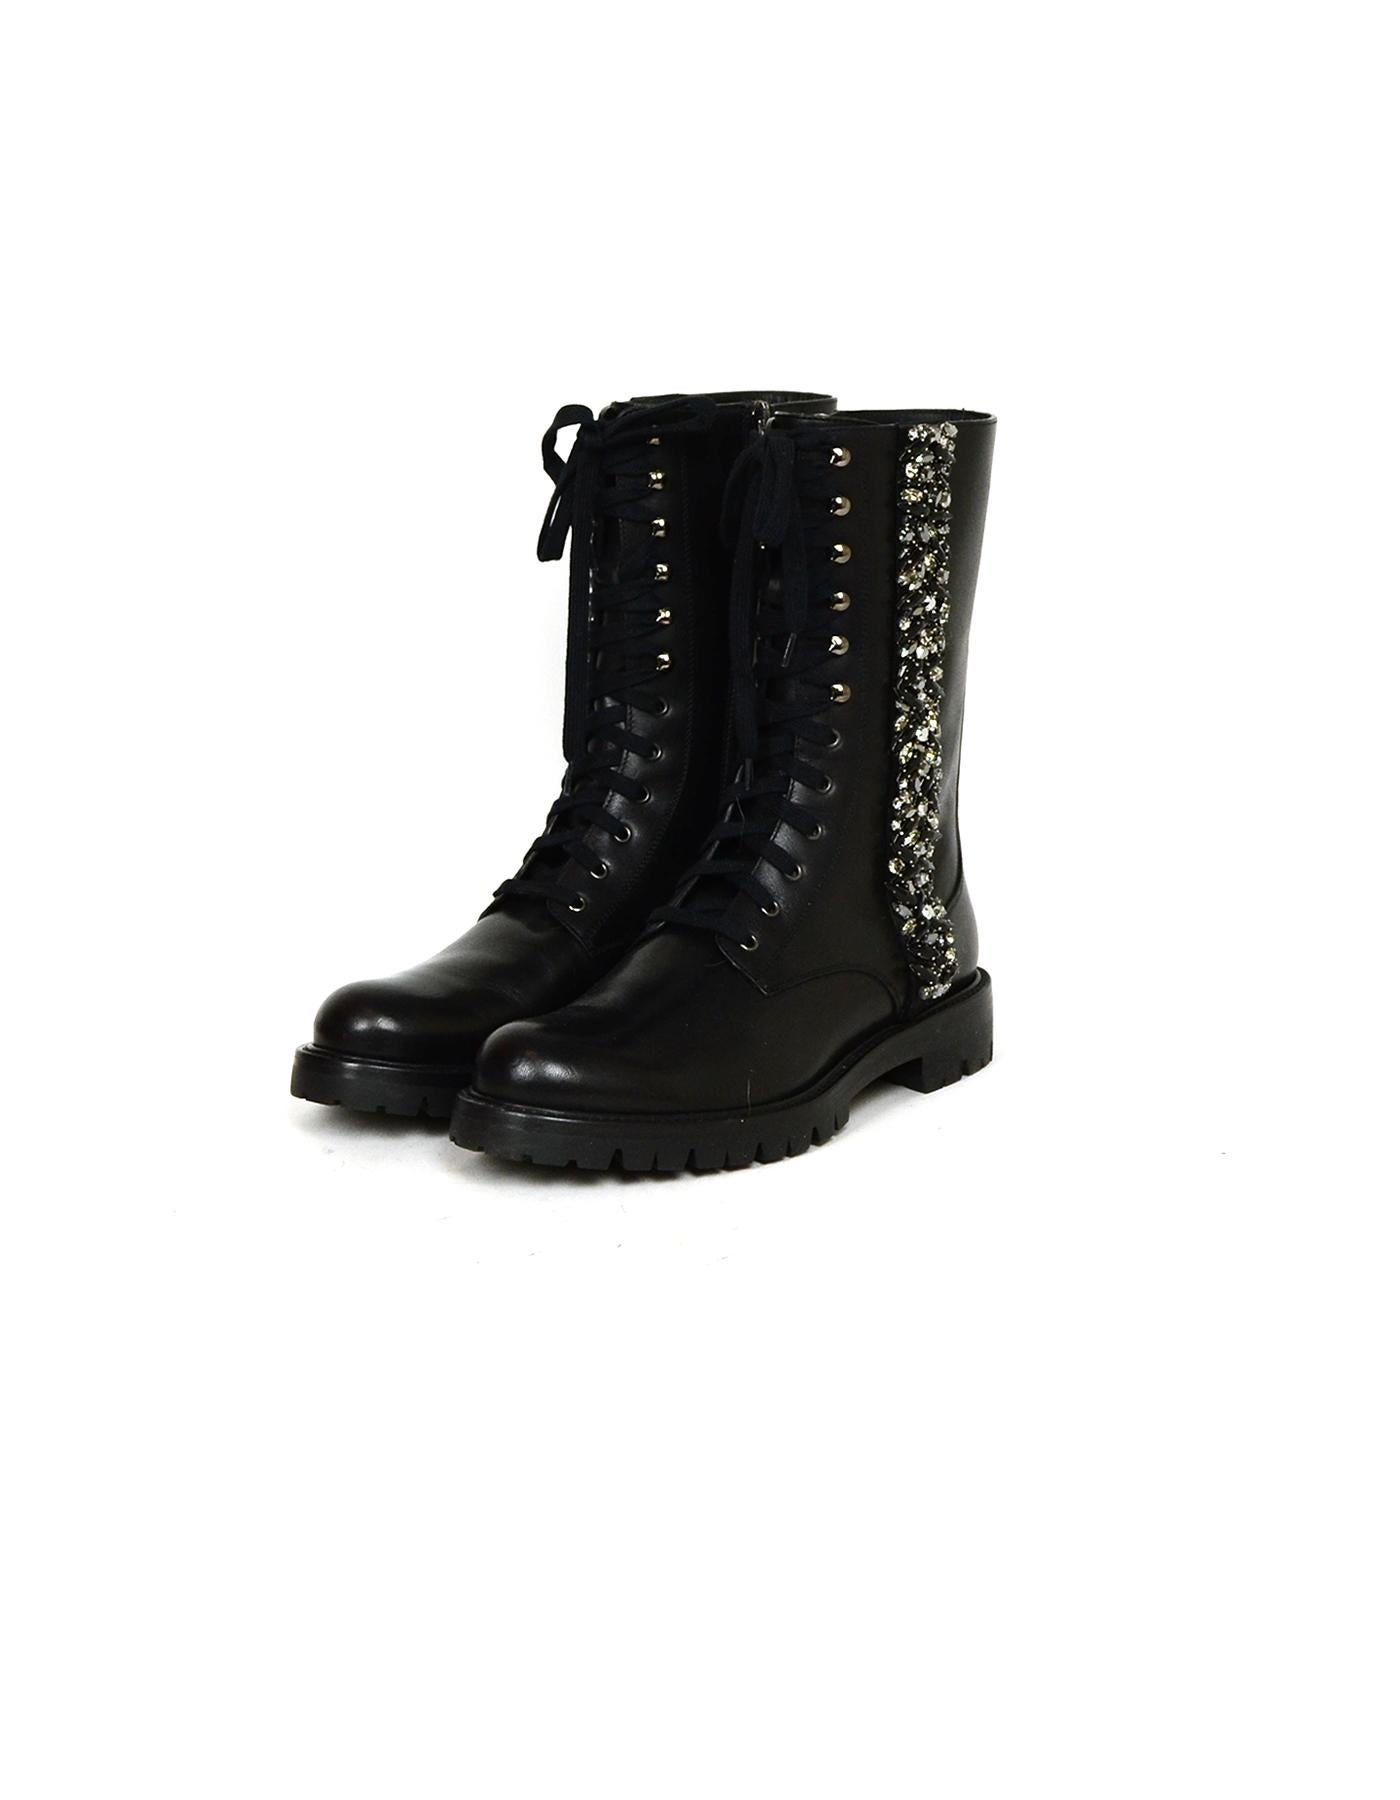 Rene Caovilla Black Leather Embellished Combat Boots sz 38

Made In: Italy
Color: Black
Hardware: Silvertone
Materials: Leather
Closure/Opening: Side Zip
Overall Condition: Excellent pre-owned condition, with the exception of some minor surface